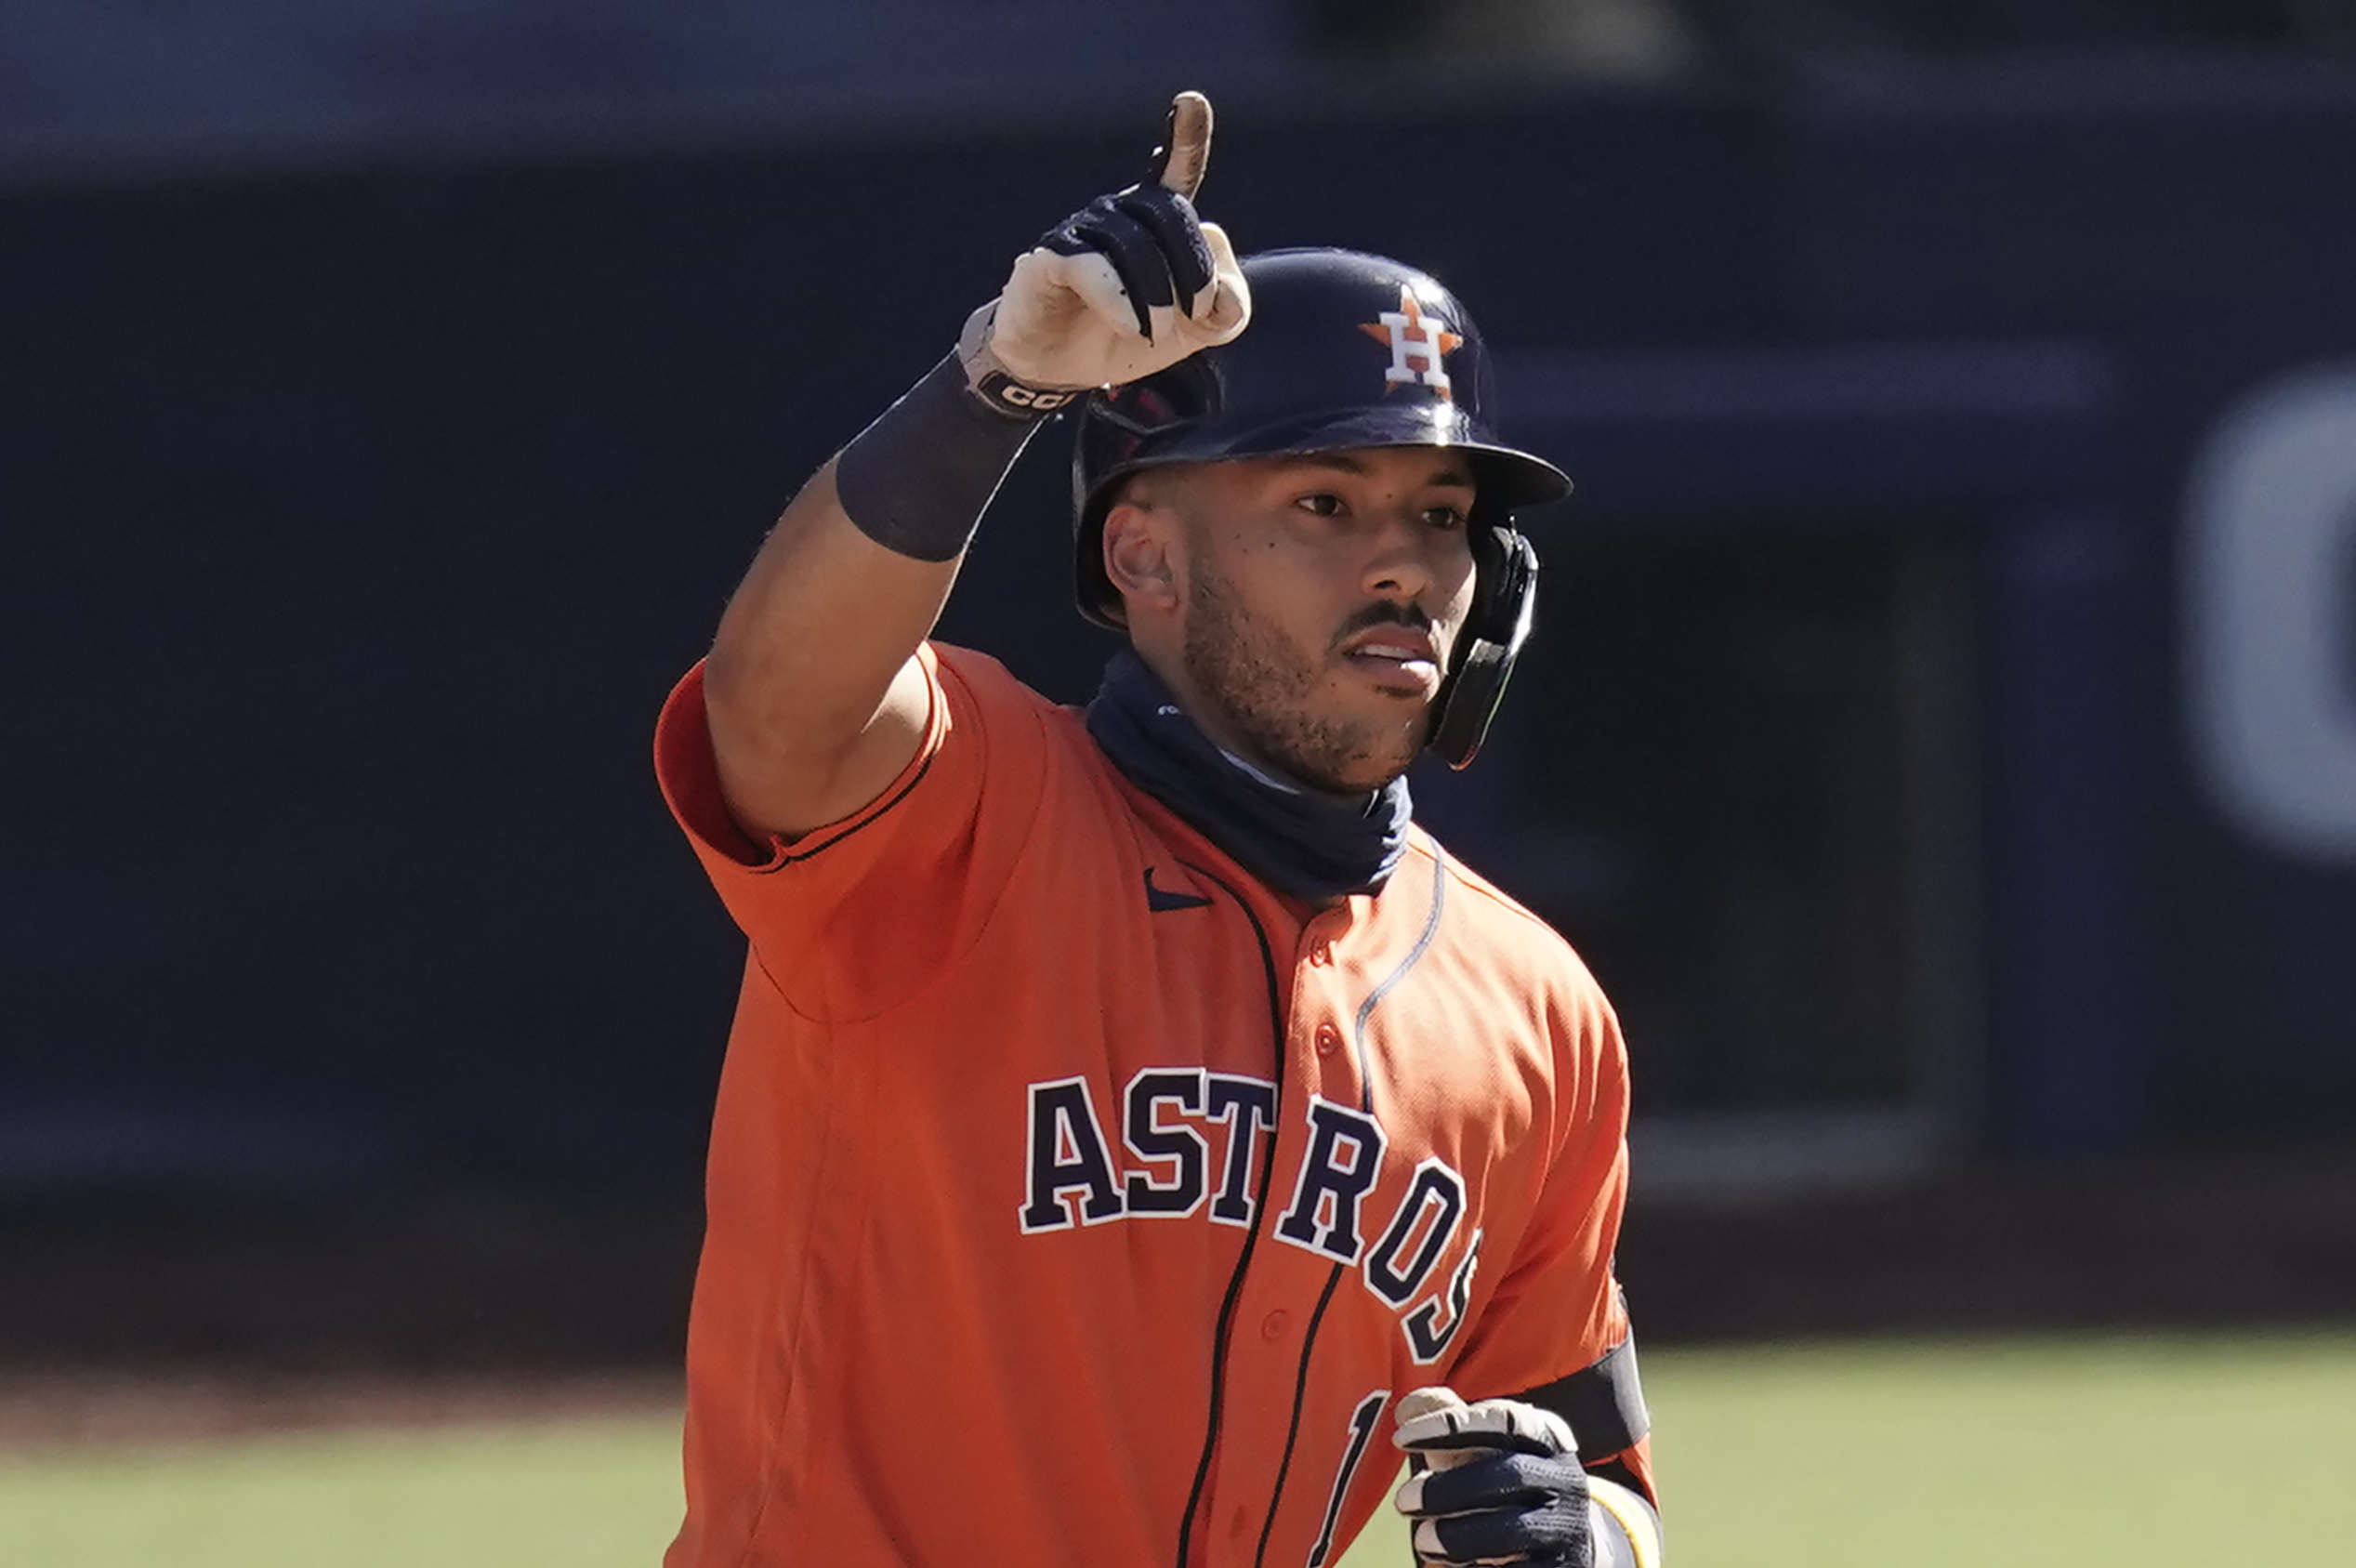 Carlos Correa's deadline day converges with opening day for Astros